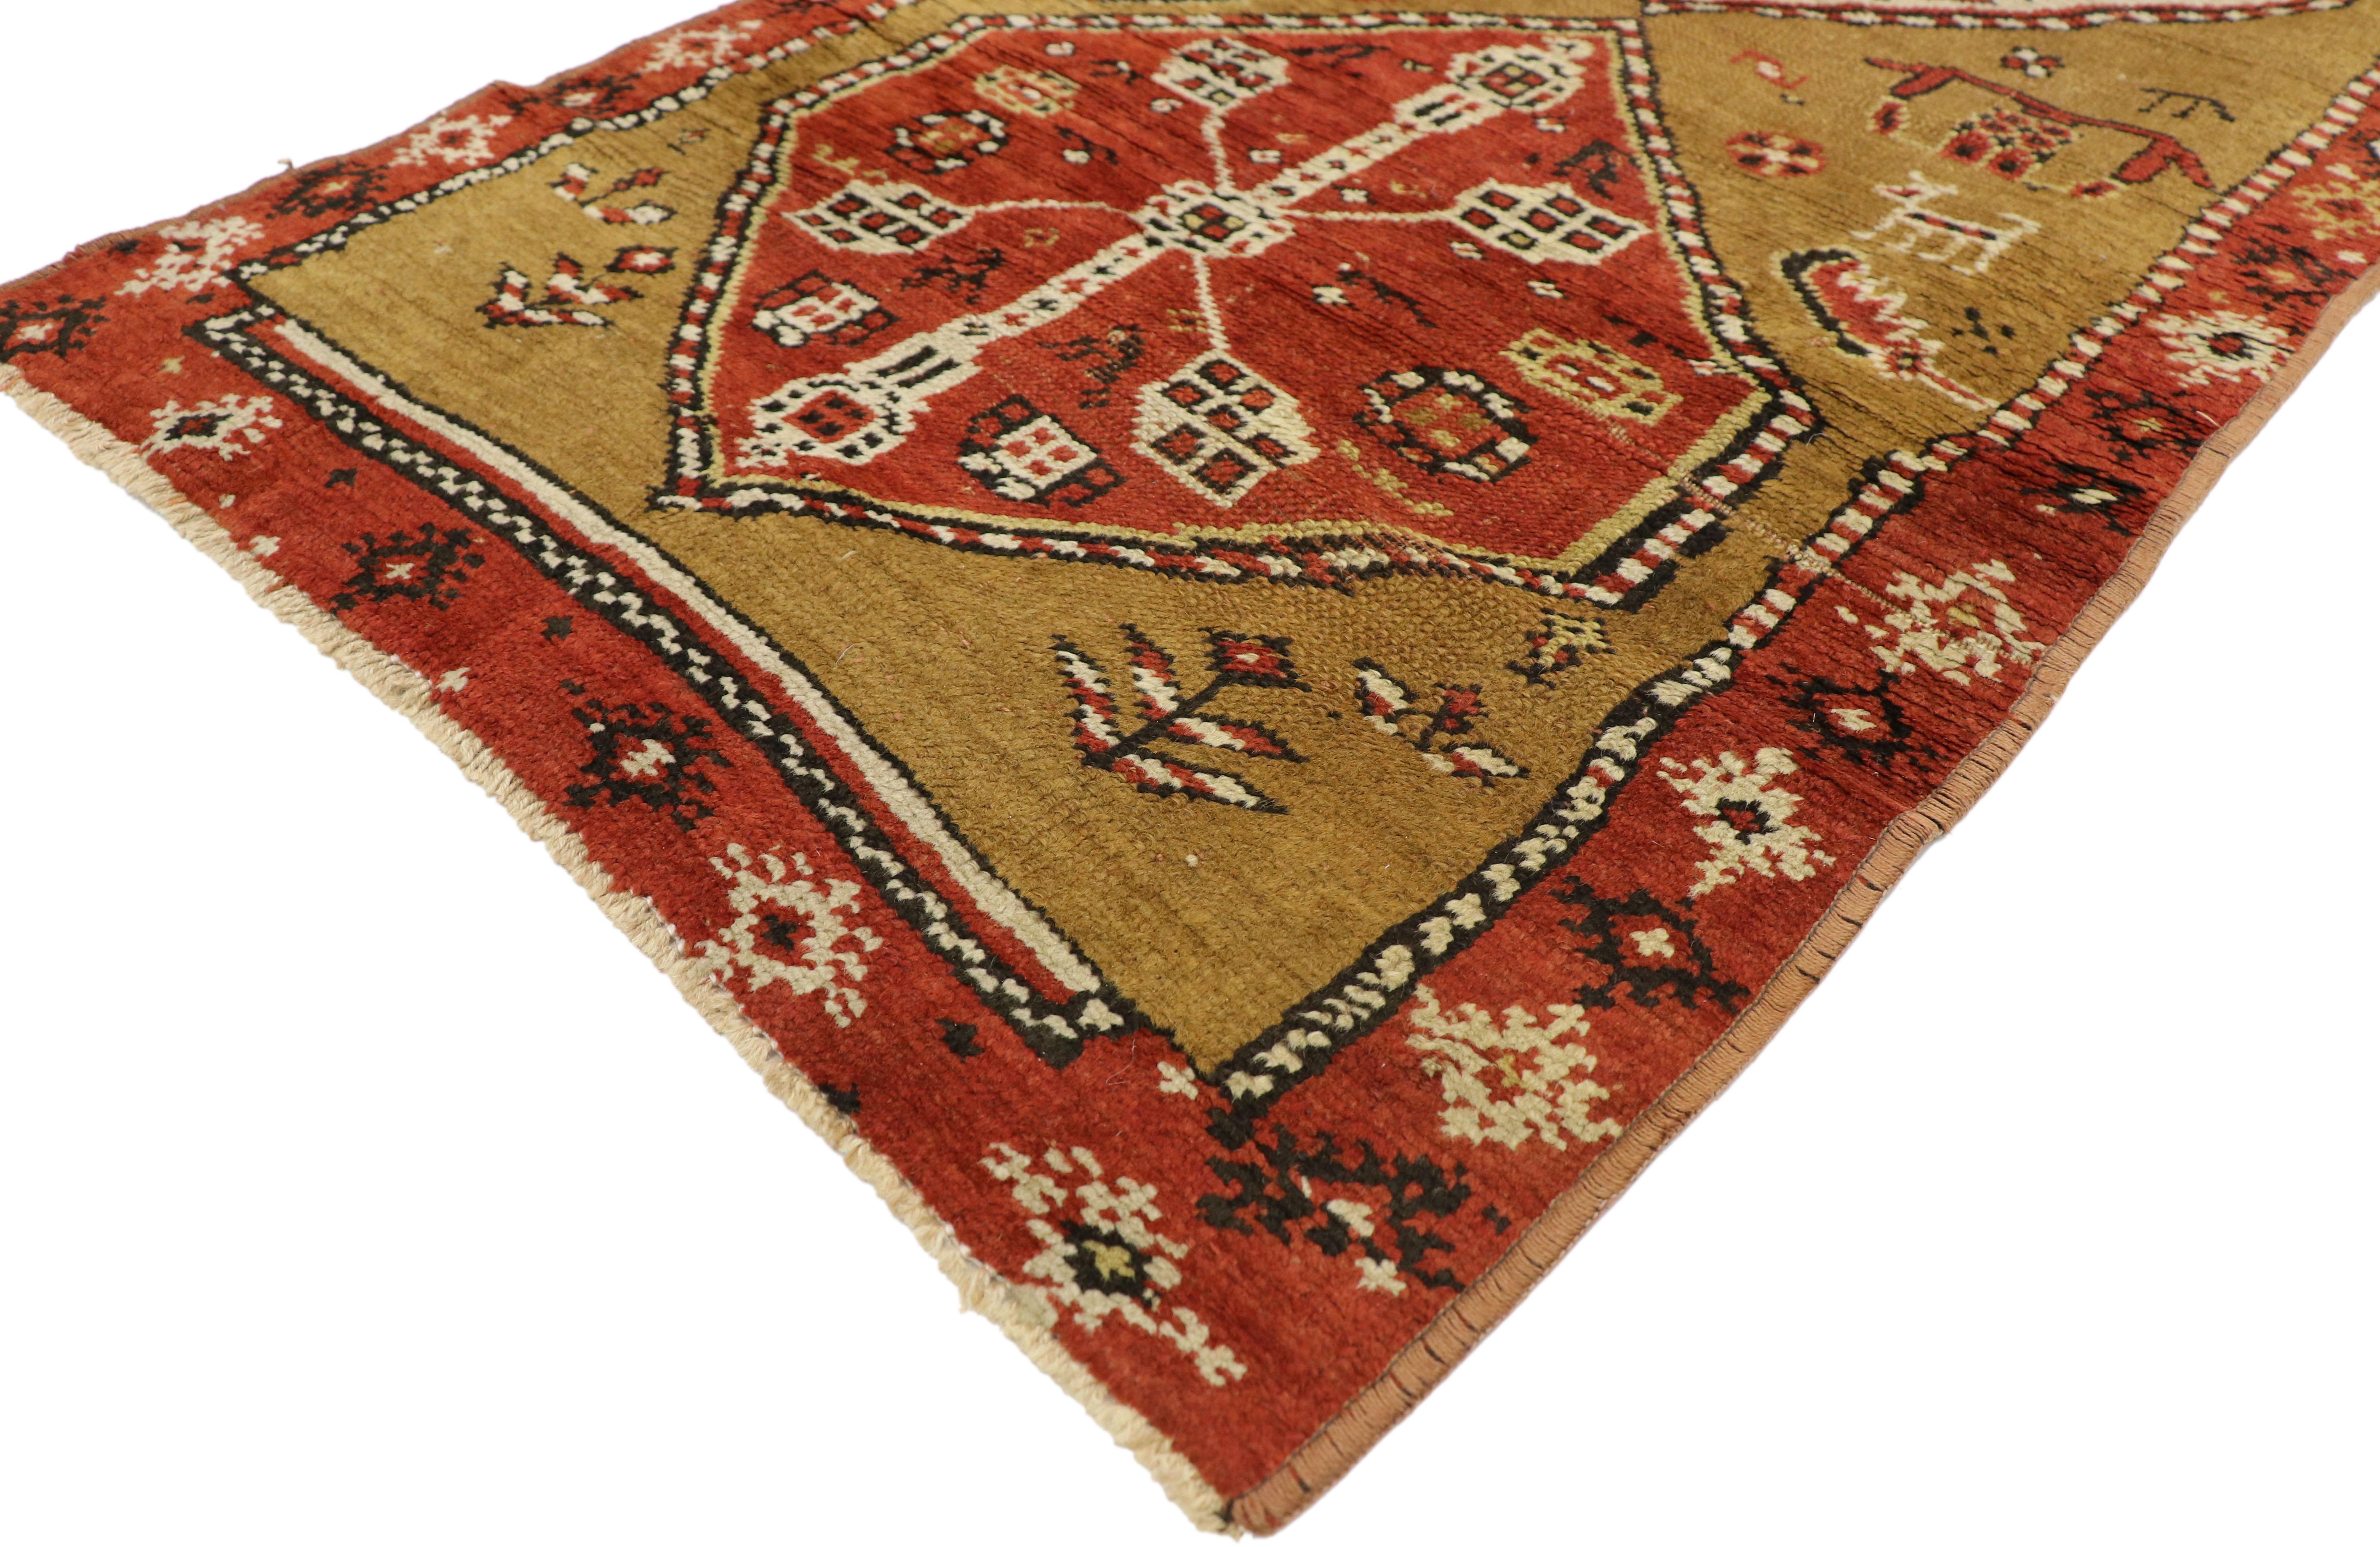 72223, antique Caucasian Tribal runner, hallway runner. This beautiful antique Caucasian hallway runner features hexagonal medallions surrounded by ancient symbolic motifs and animal figures on an abrashed camel-colored field. It is framed by a thin